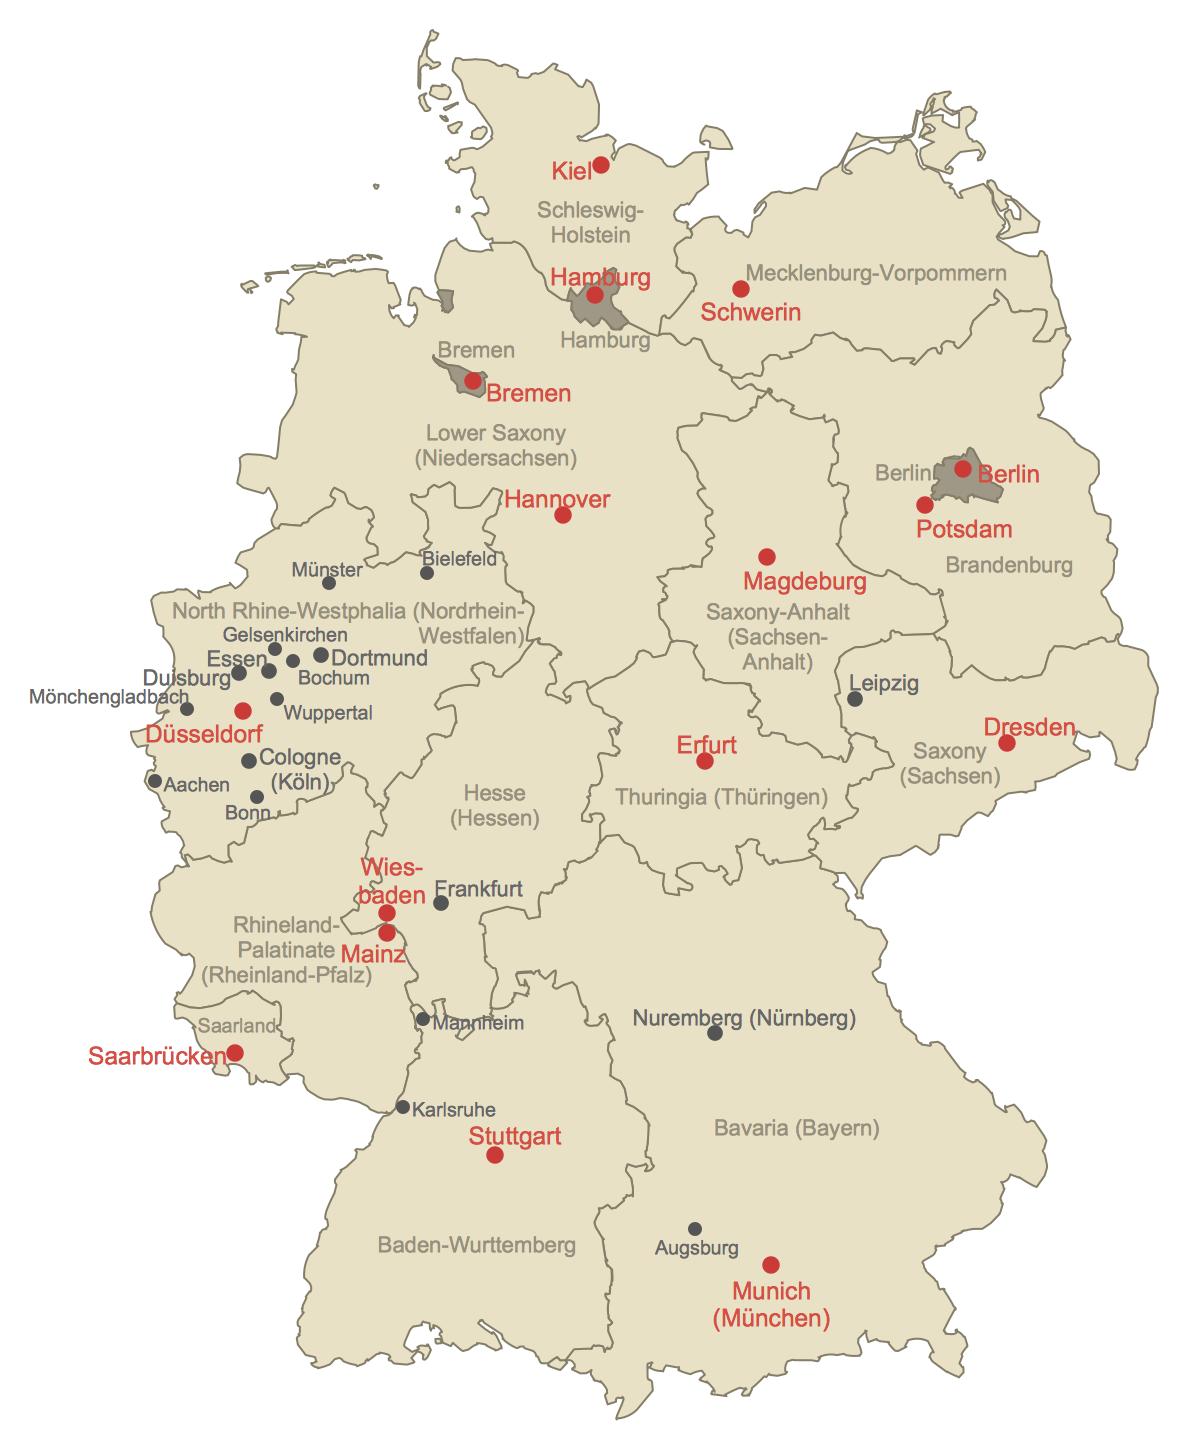 Depict Federal Republic of Germany on a printable regional map